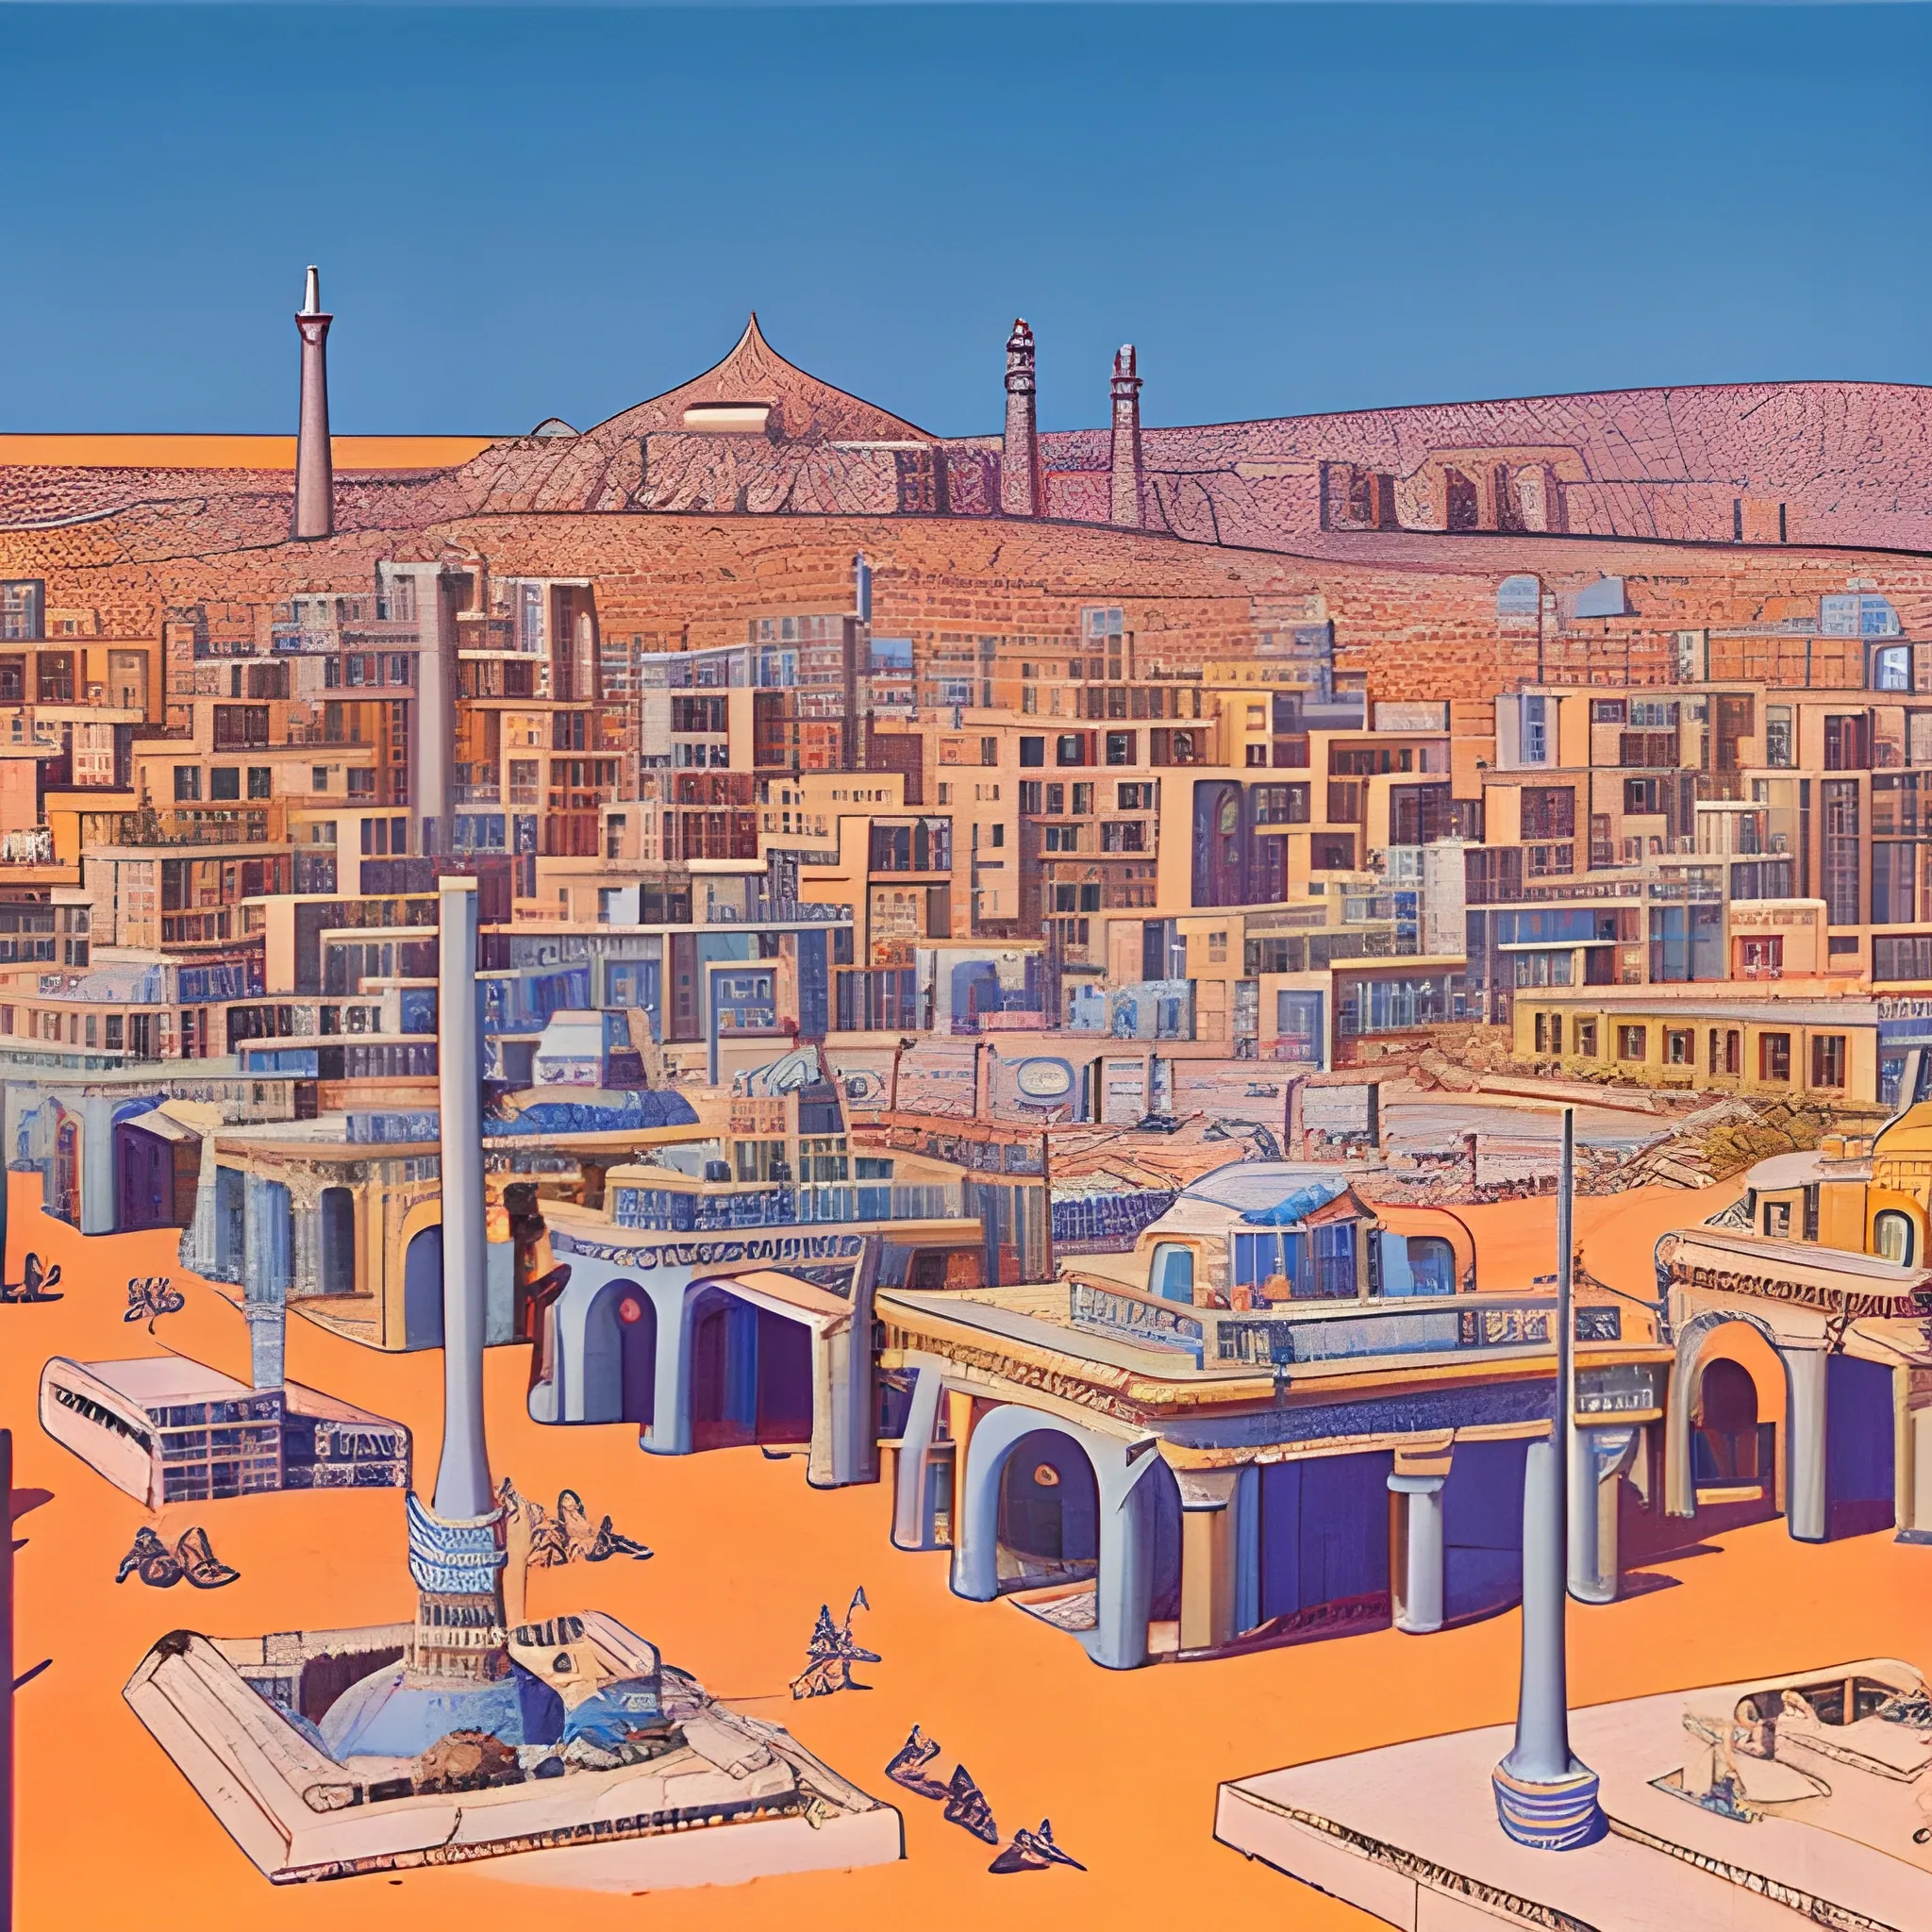 1960's Somalian port city, with greek architecture, drawn in Jean Giraud's art style